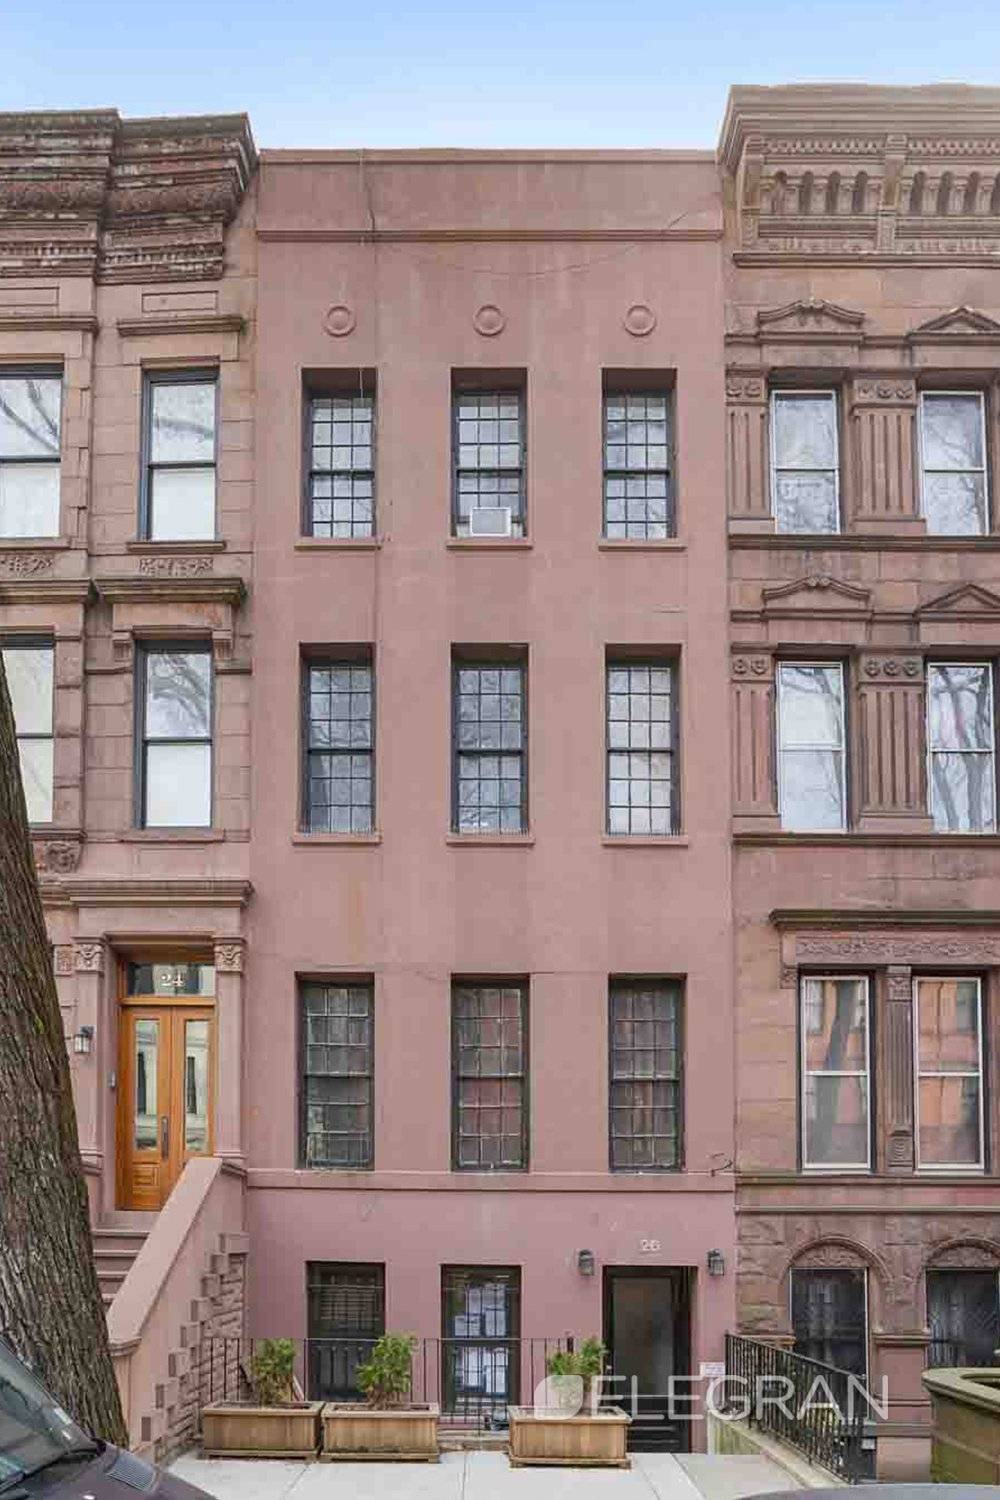 Elegran Real Estate is pleased to offer the following prime Upper West Side Townhouse located on West 95th Street and Central Park West.